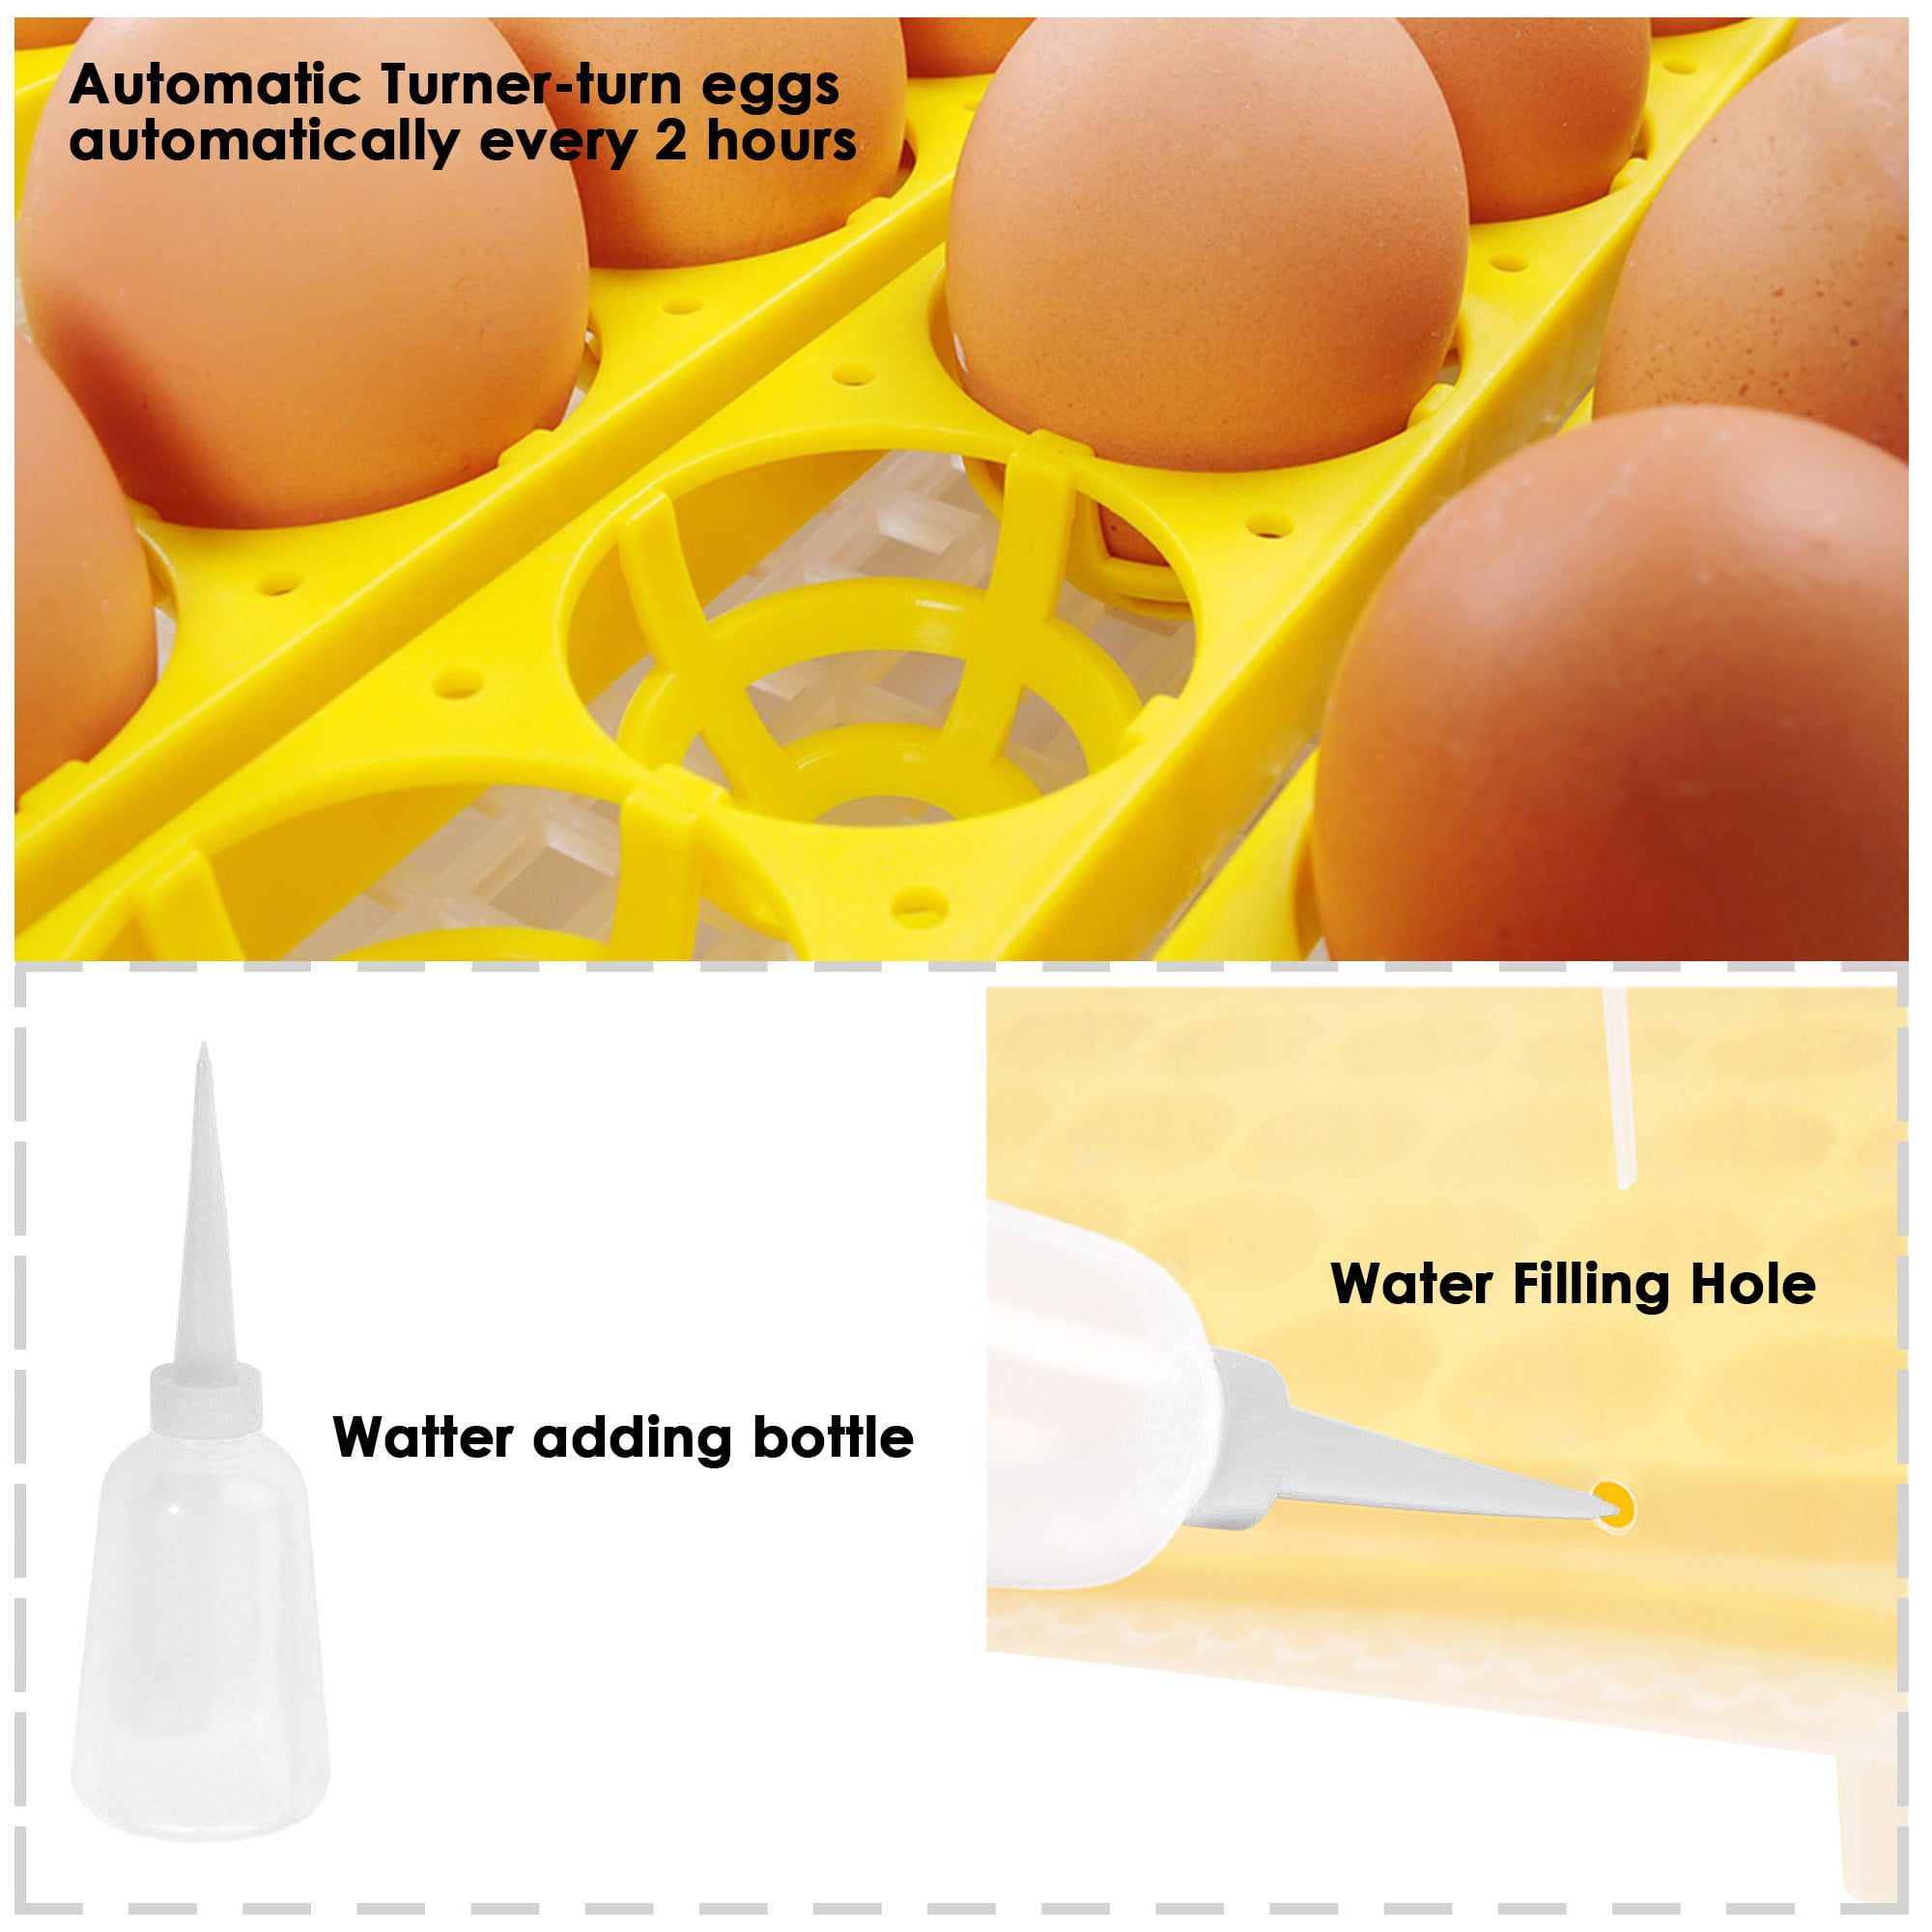 Check out our new egg washer! We used to wash eggs until 4AM. Not anym, Eggs